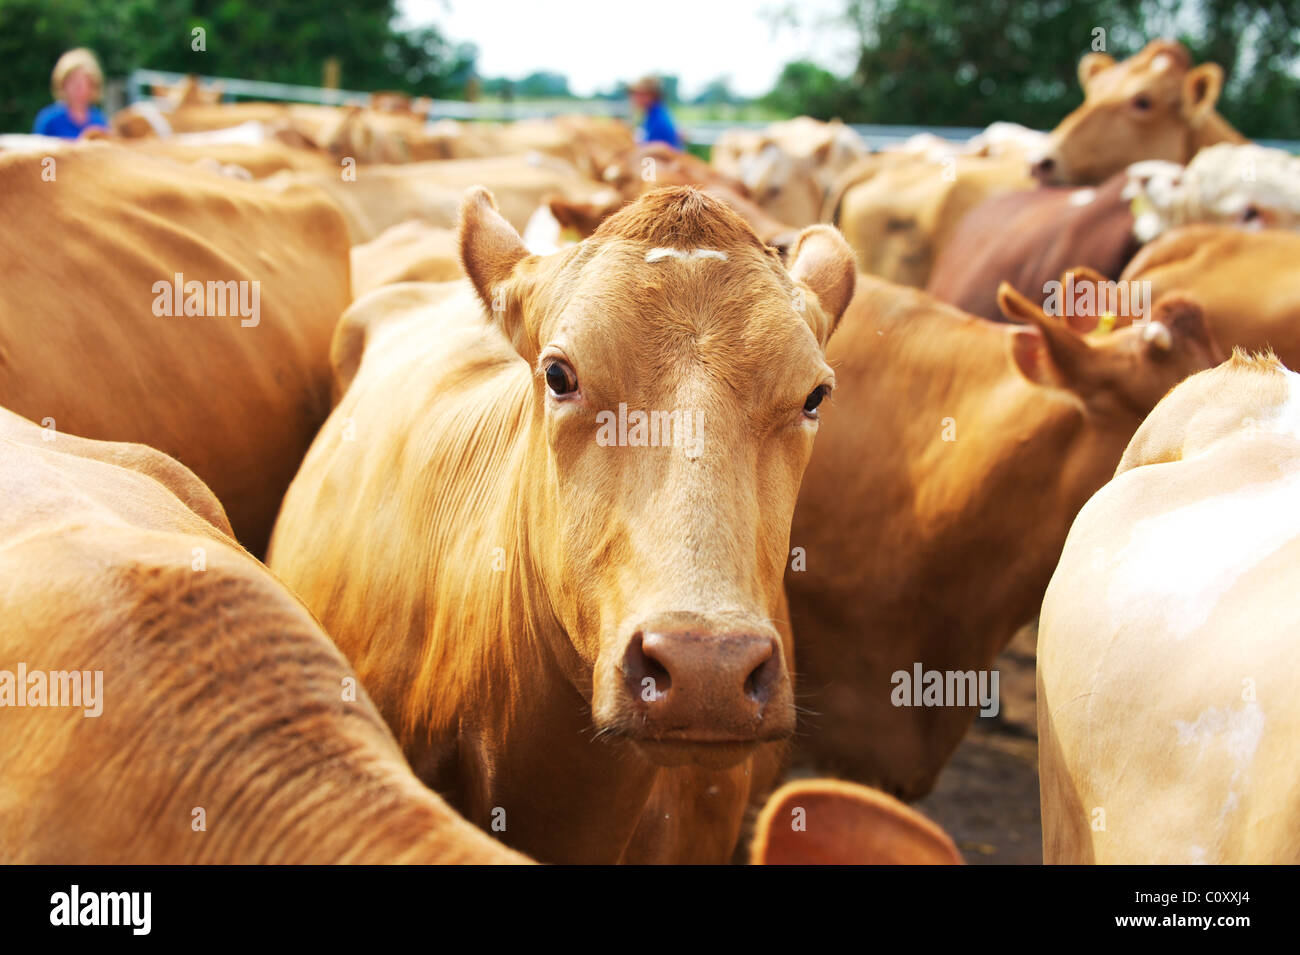 Herd of cows in a pen in a UK farm awaiting milking by the farmer Stock Photo